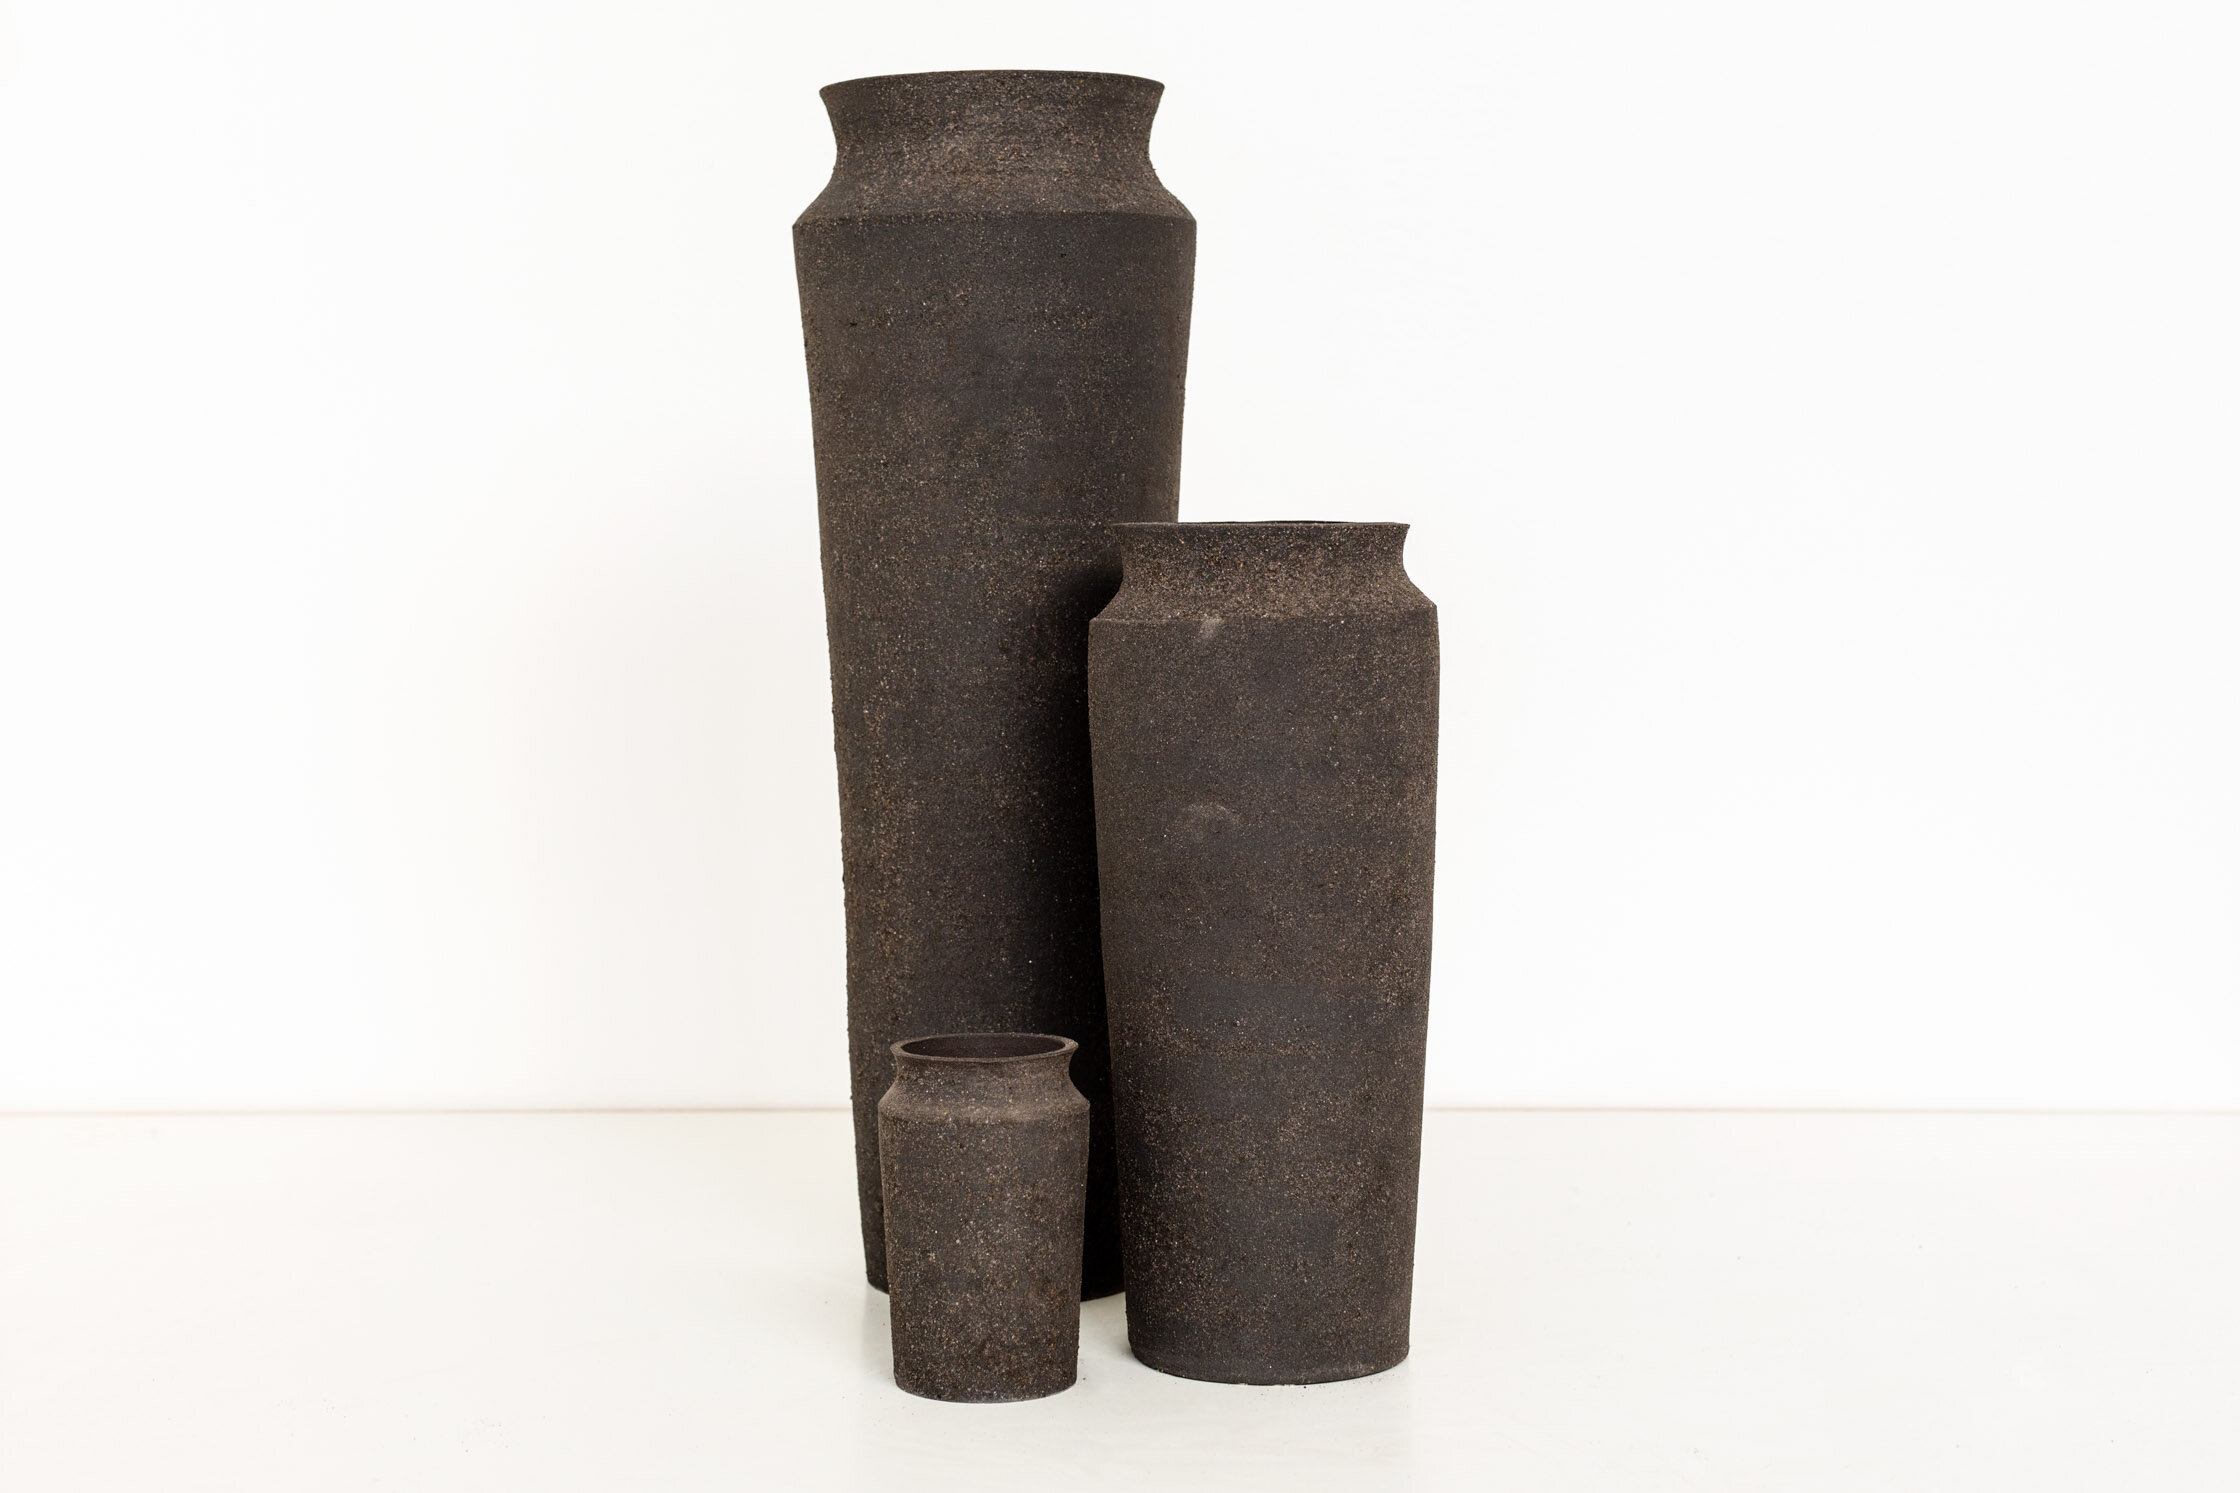   Three ceramic vessels by ceramic artist Kevin Callaghan. Made of toxin sludge from a radioactive tailings lake in Mongolia. Each vessel is proportioned as a traditional Ming vase and is made from the amount of toxic waste created in the production 